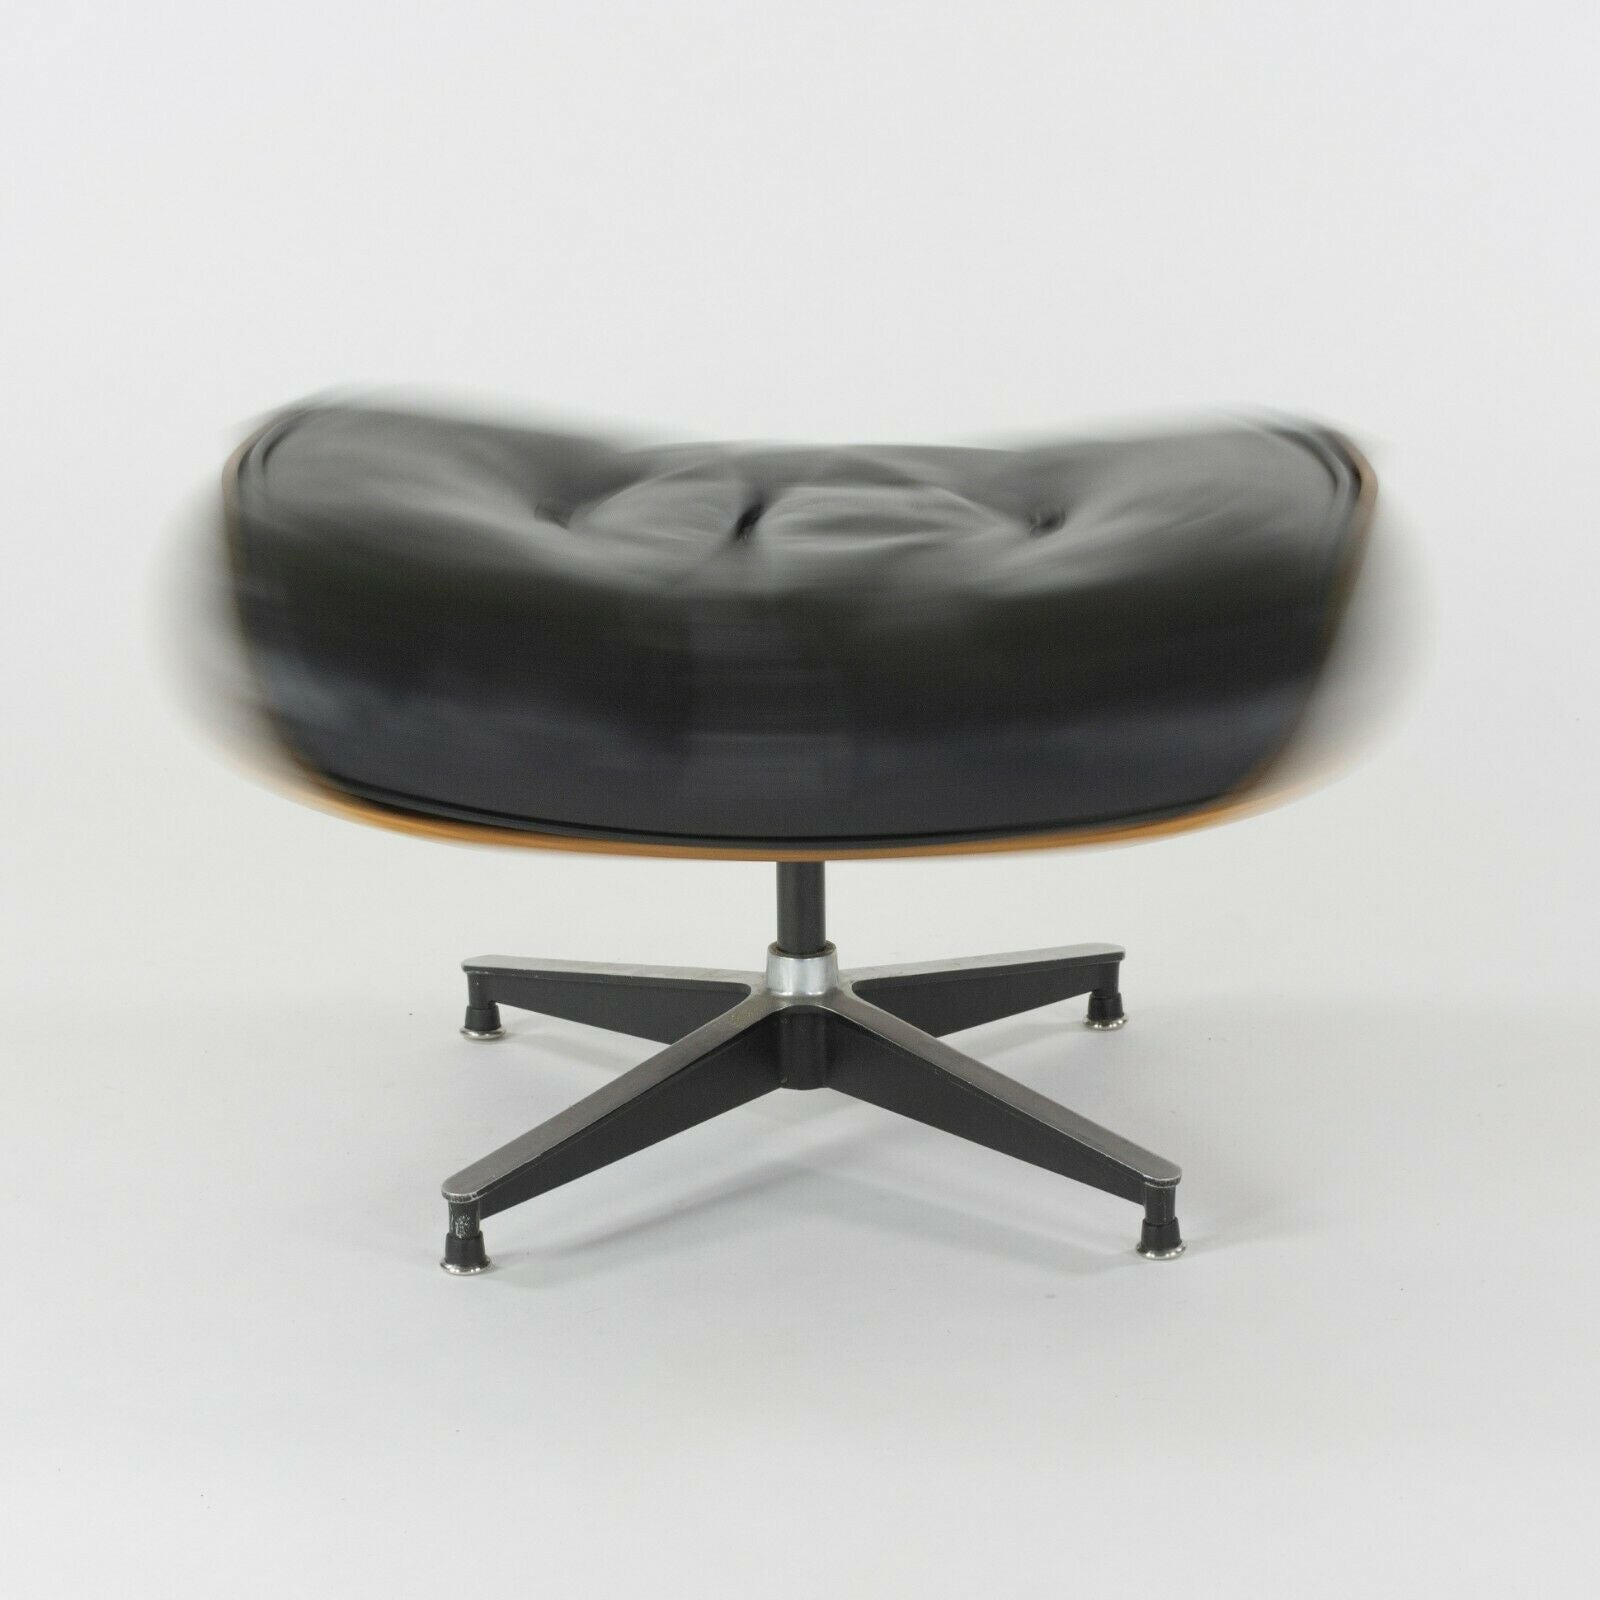 SOLD 1956 Holy Grail Herman Miller Eames Lounge Chair with Swivel Ottoman + Boot Glides + 3 Hole Arms